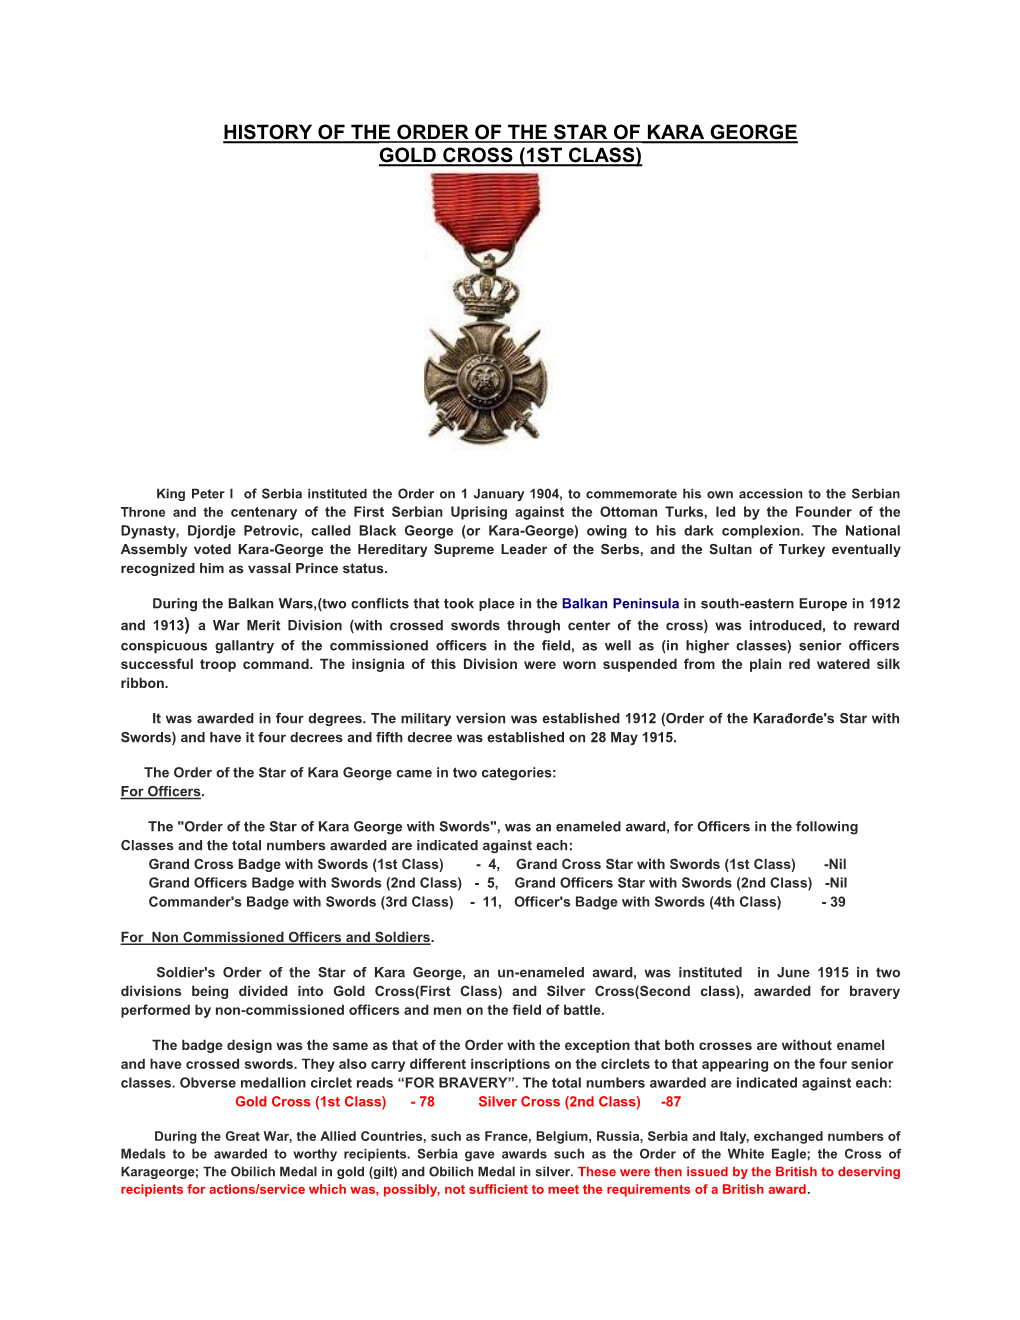 History of the Order of the Star of Kara George Gold Cross (1St Class)